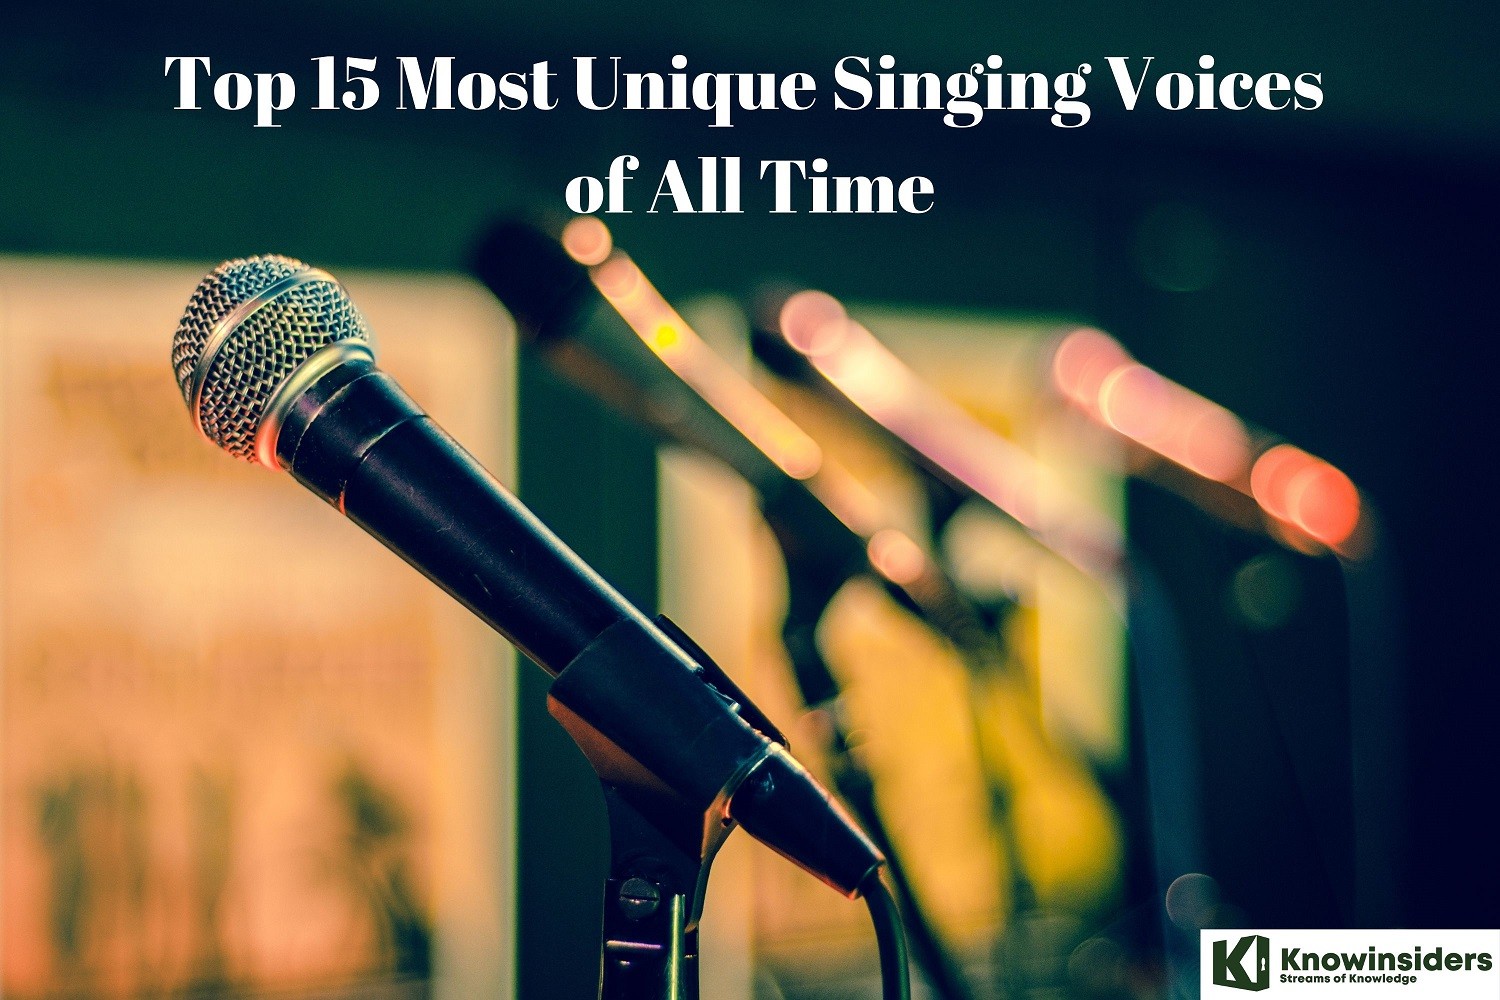 Top 15 Most Unique Singing Voices of All Time